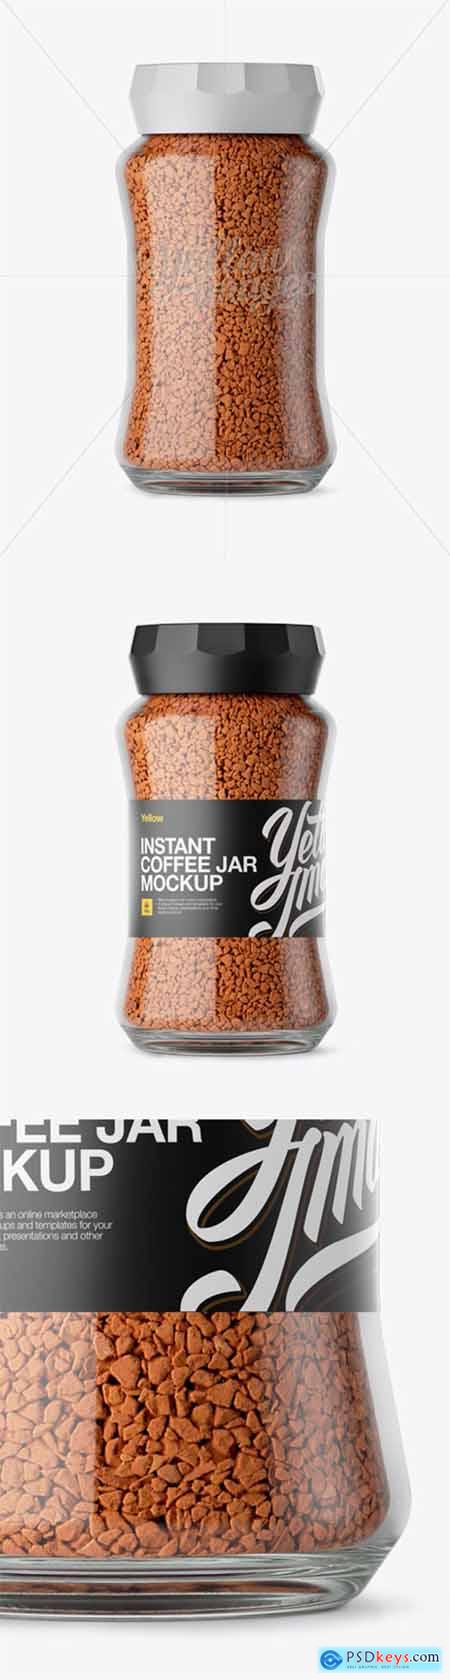 Clear Glass Jar With Instant Coffee Mockup 13617